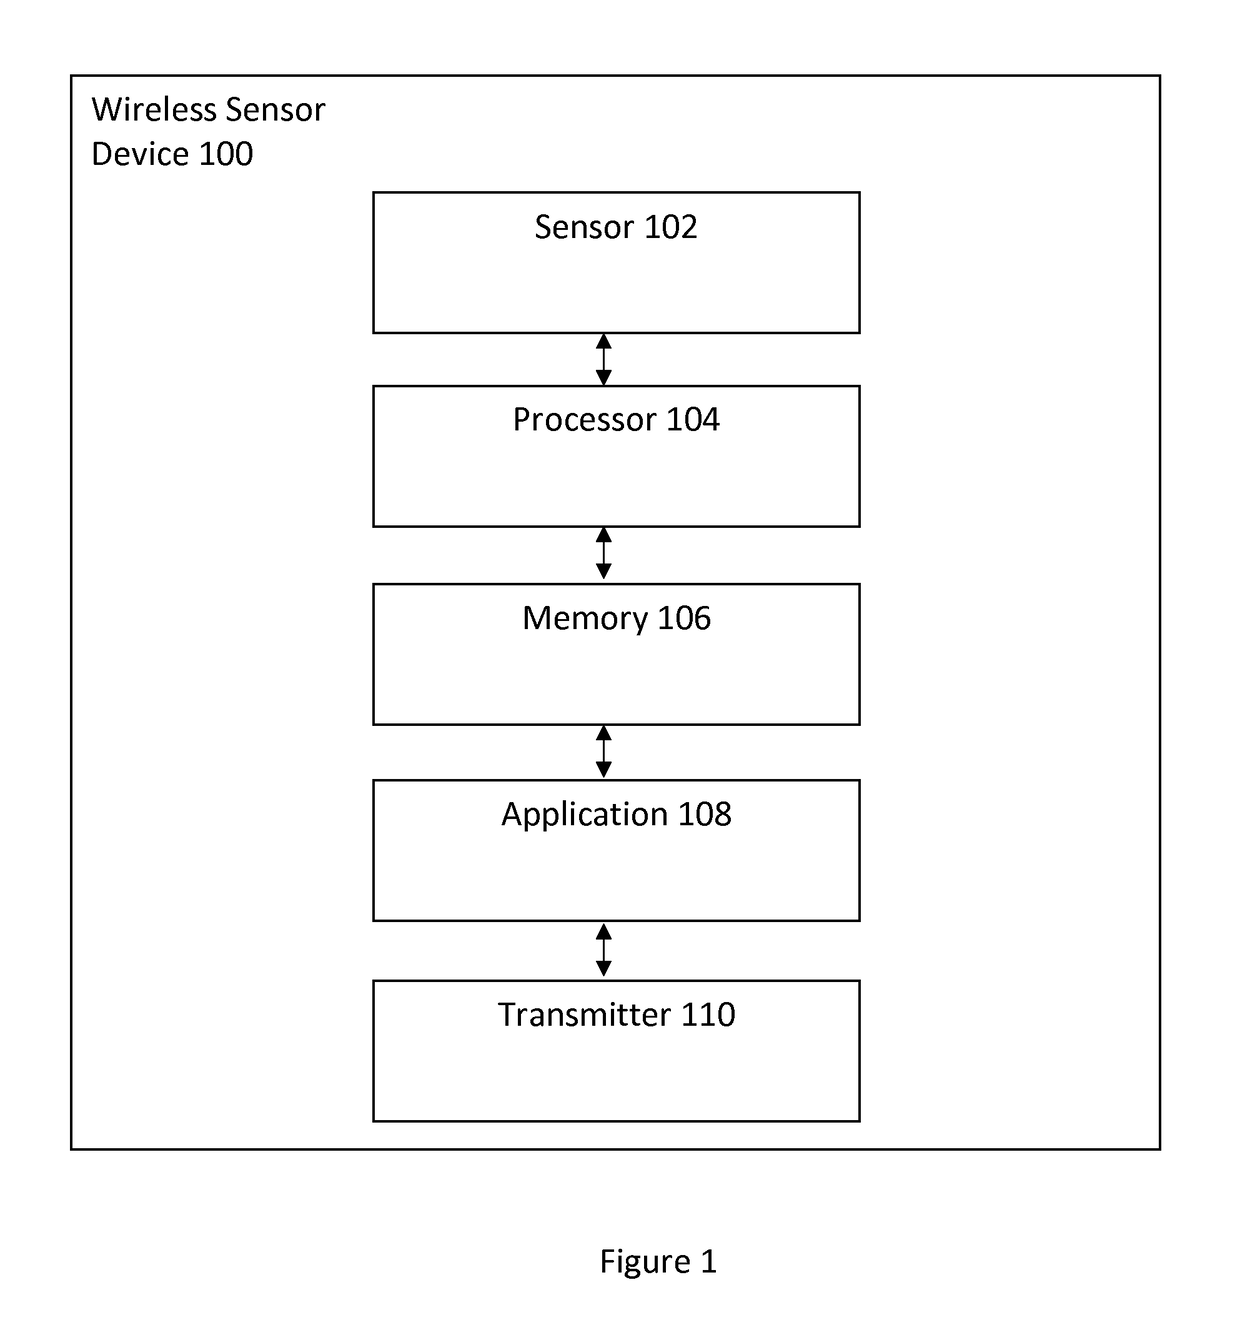 Automated sleep staging using wearable sensors